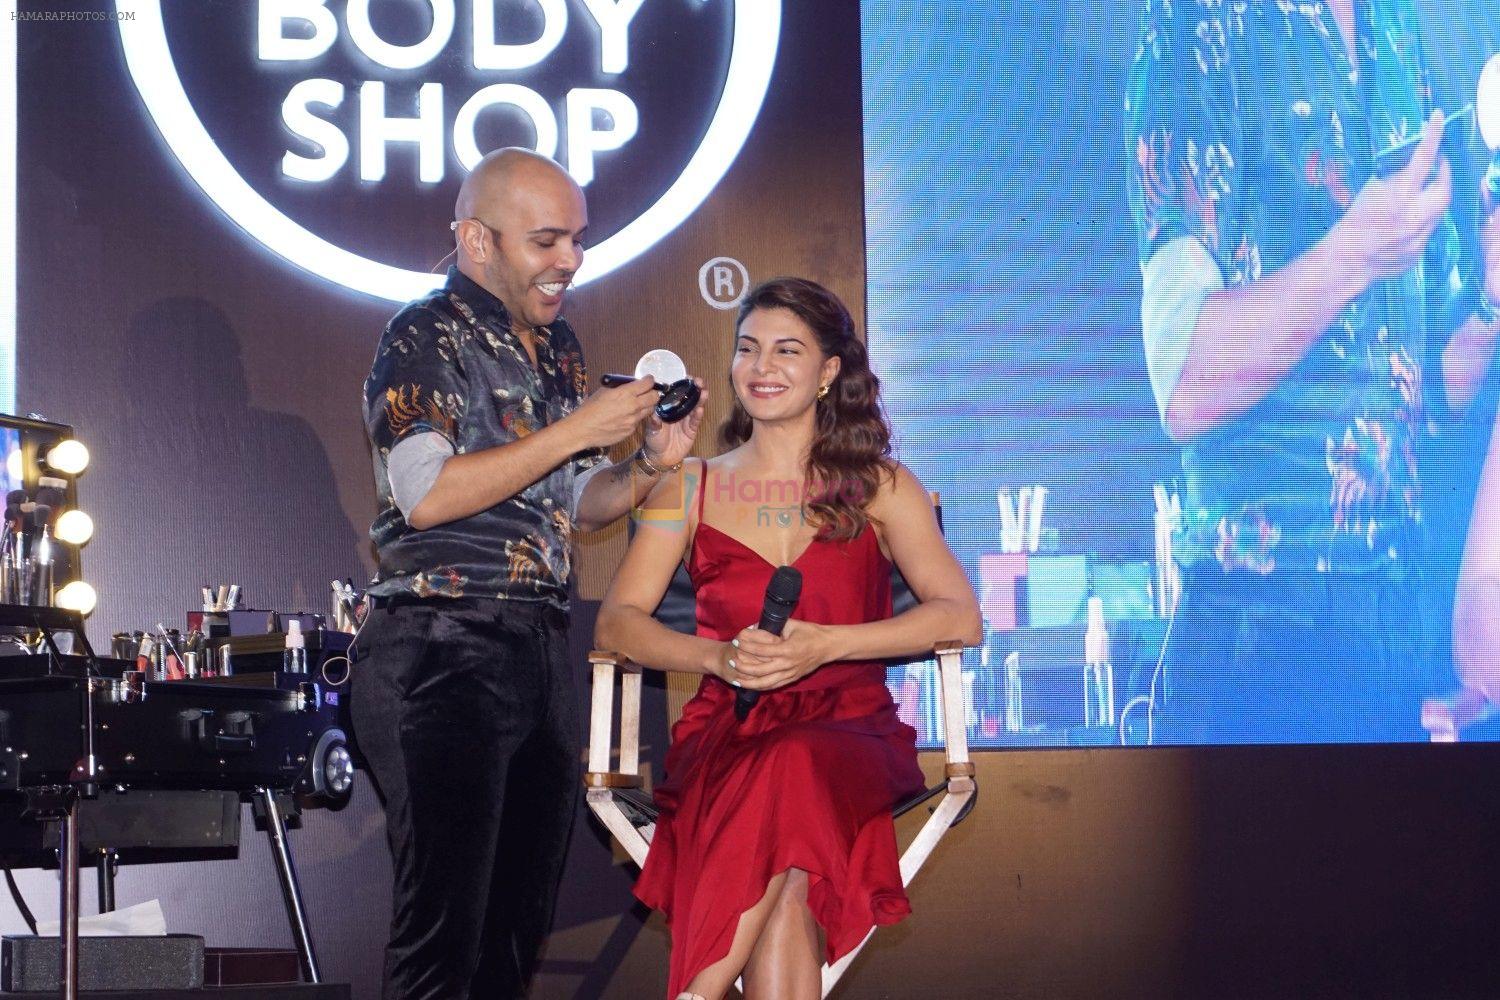 Jacqueline Fernandez At Her First Makeup Master Class With Shaan Mutthil on 18th April 2018